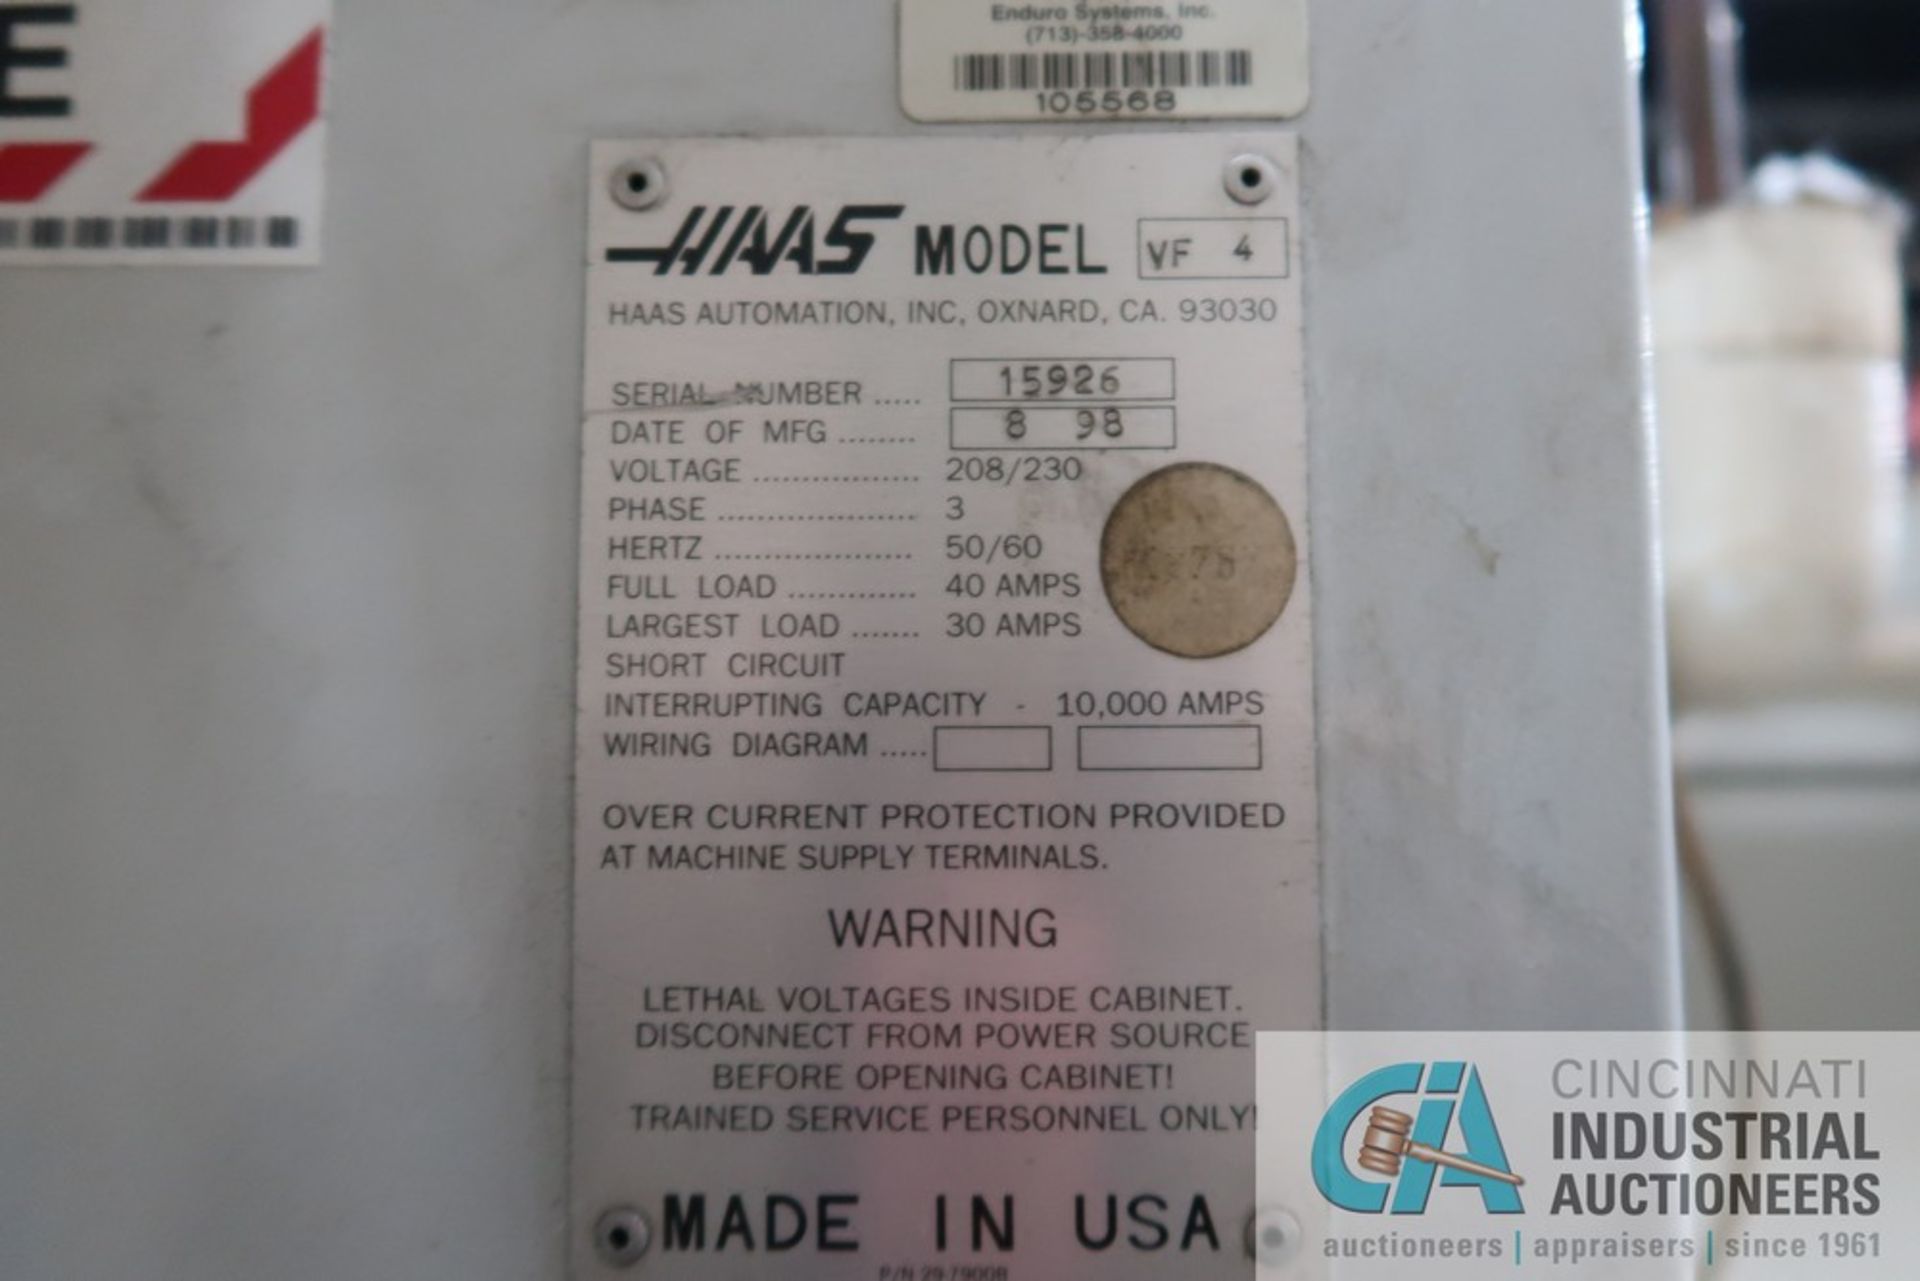 1998 HAAS MODEL VF-4 CNC VERTICAL MACHINING CENTER; S/N 15926 - Image 10 of 10